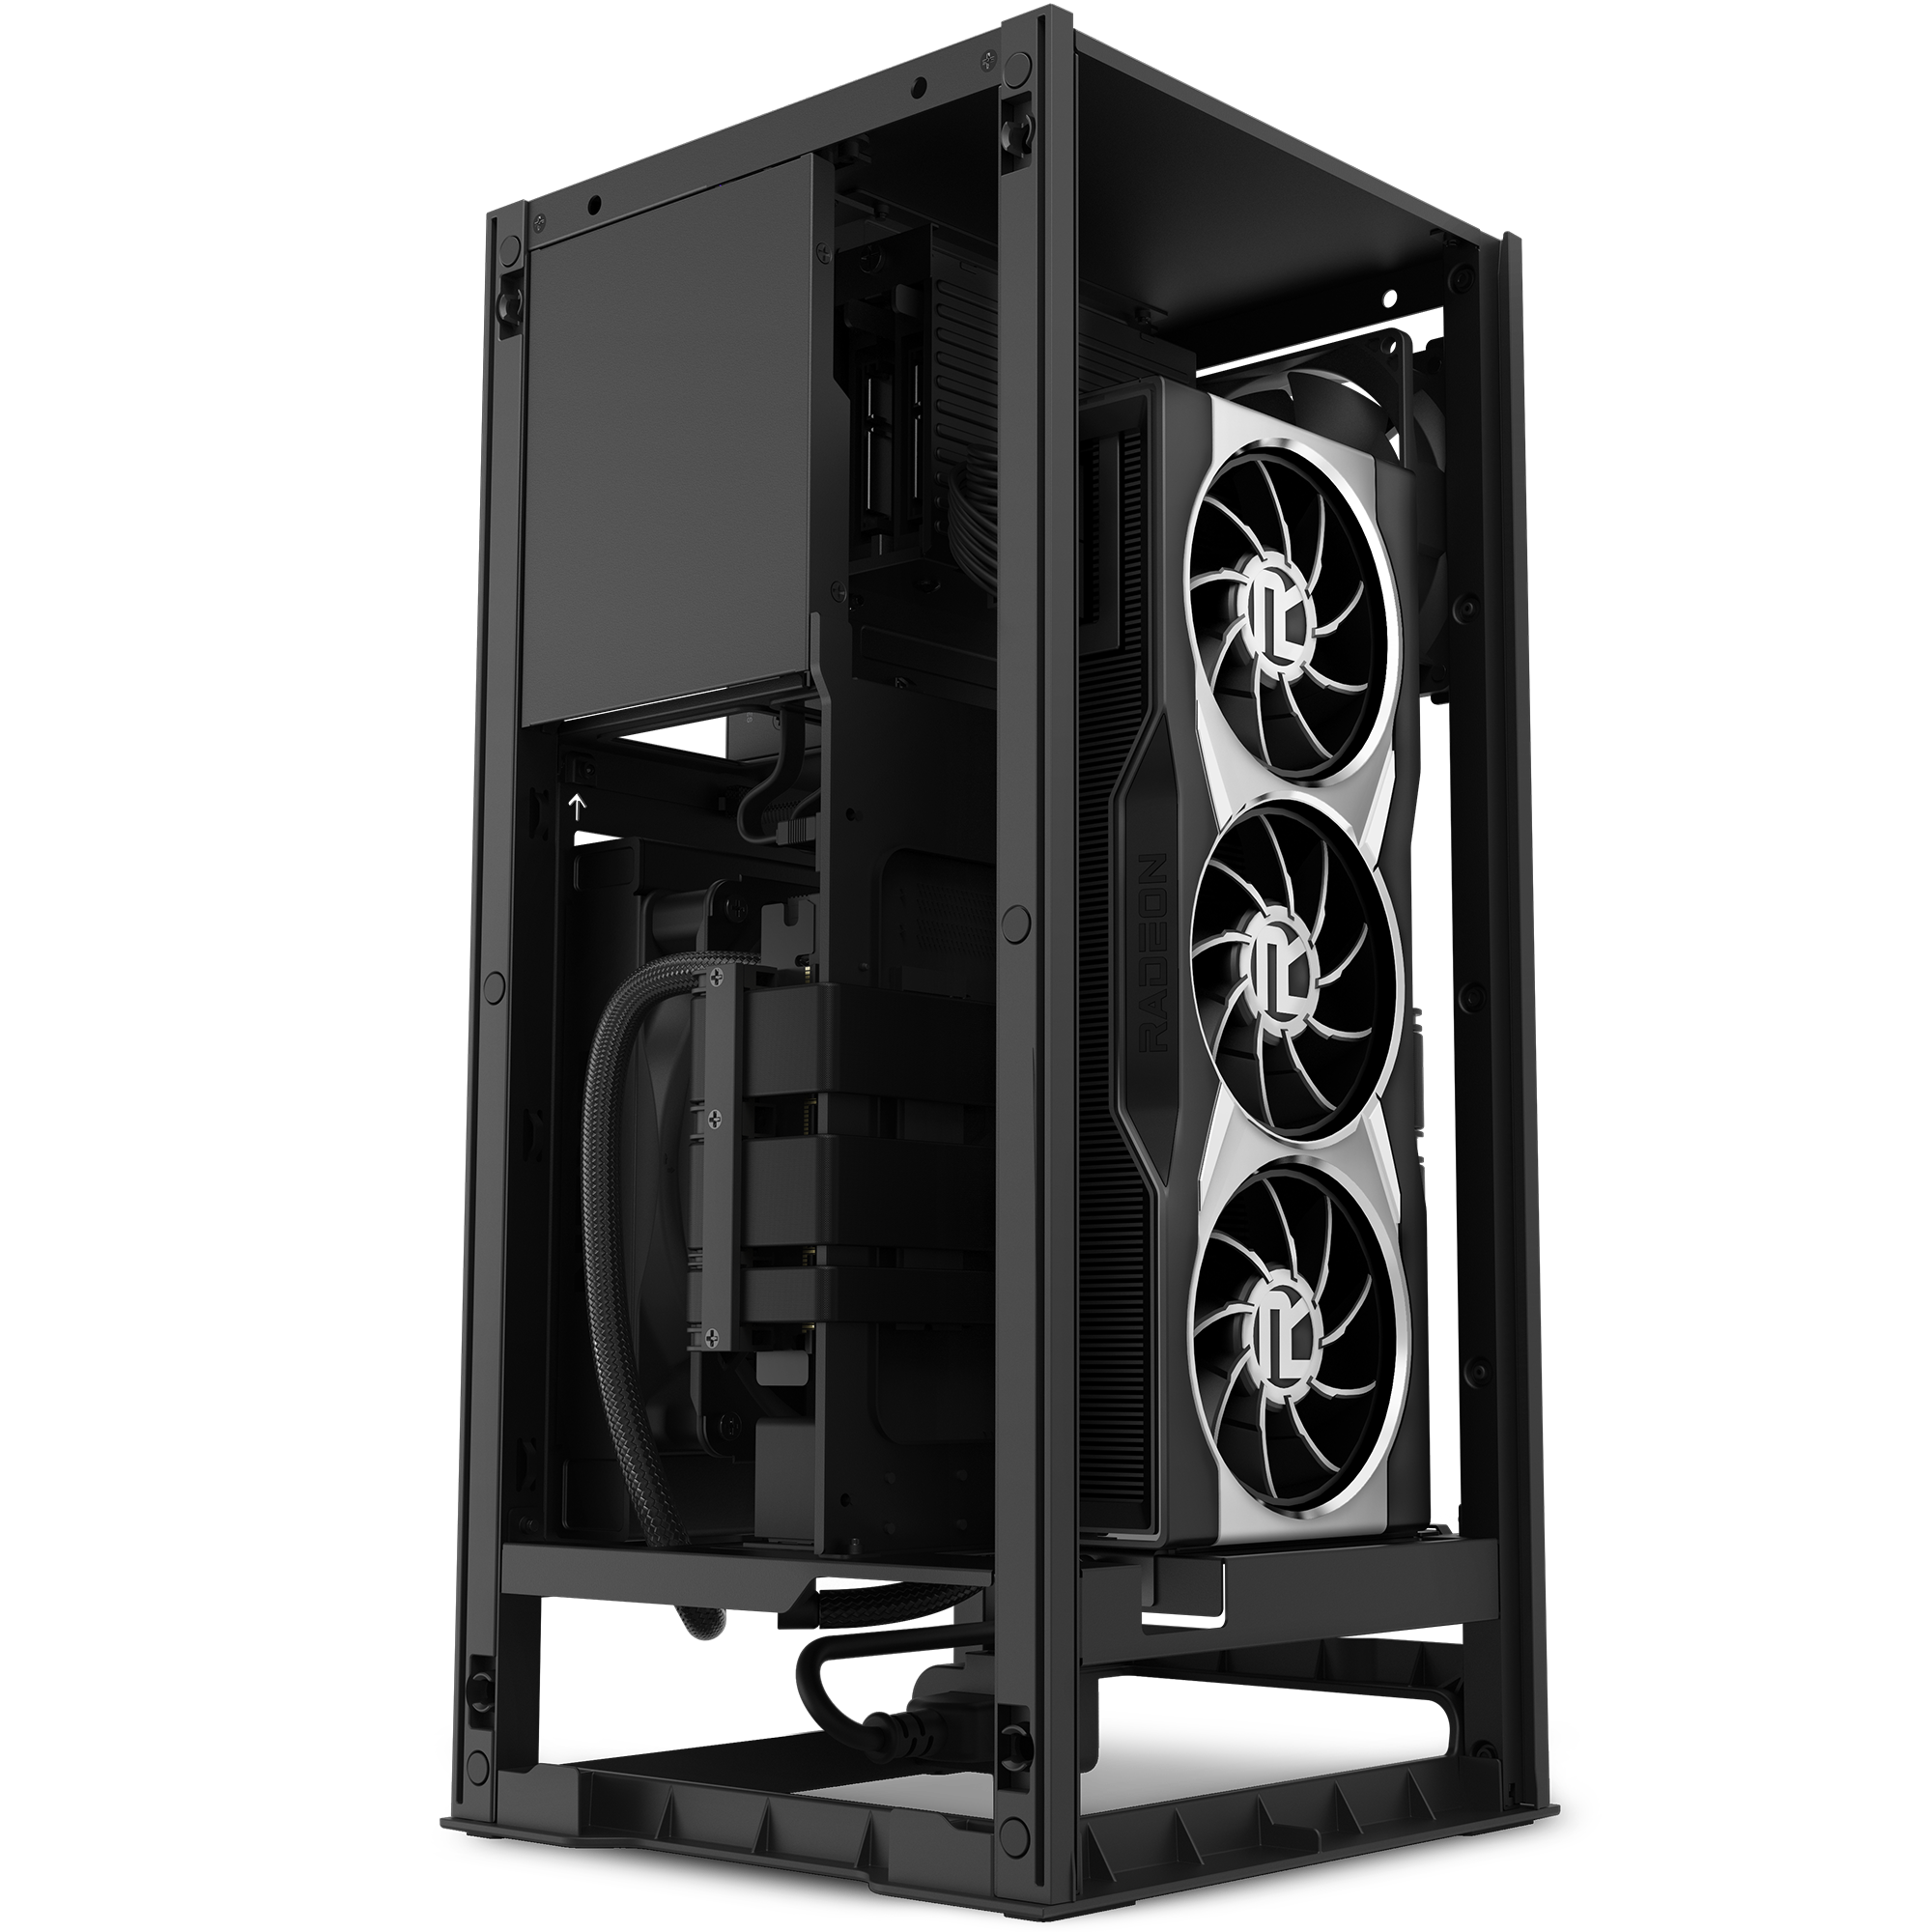 NZXT H1 V2 2022 Custom Vented Front or Back Panel 